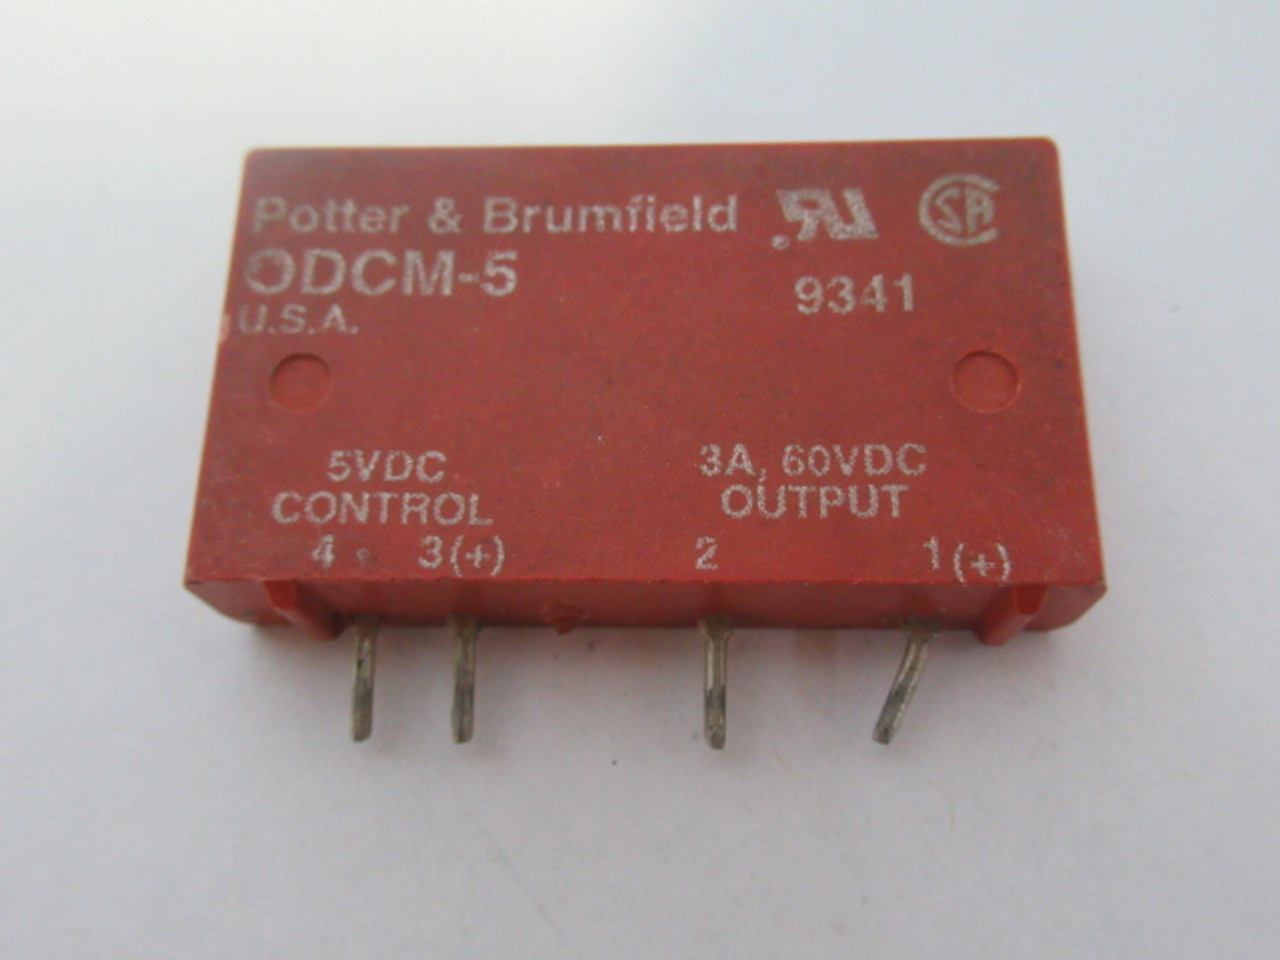 Potter & Brumfield ODCM-5 Output Module 5VDC 3A 60VDC USED